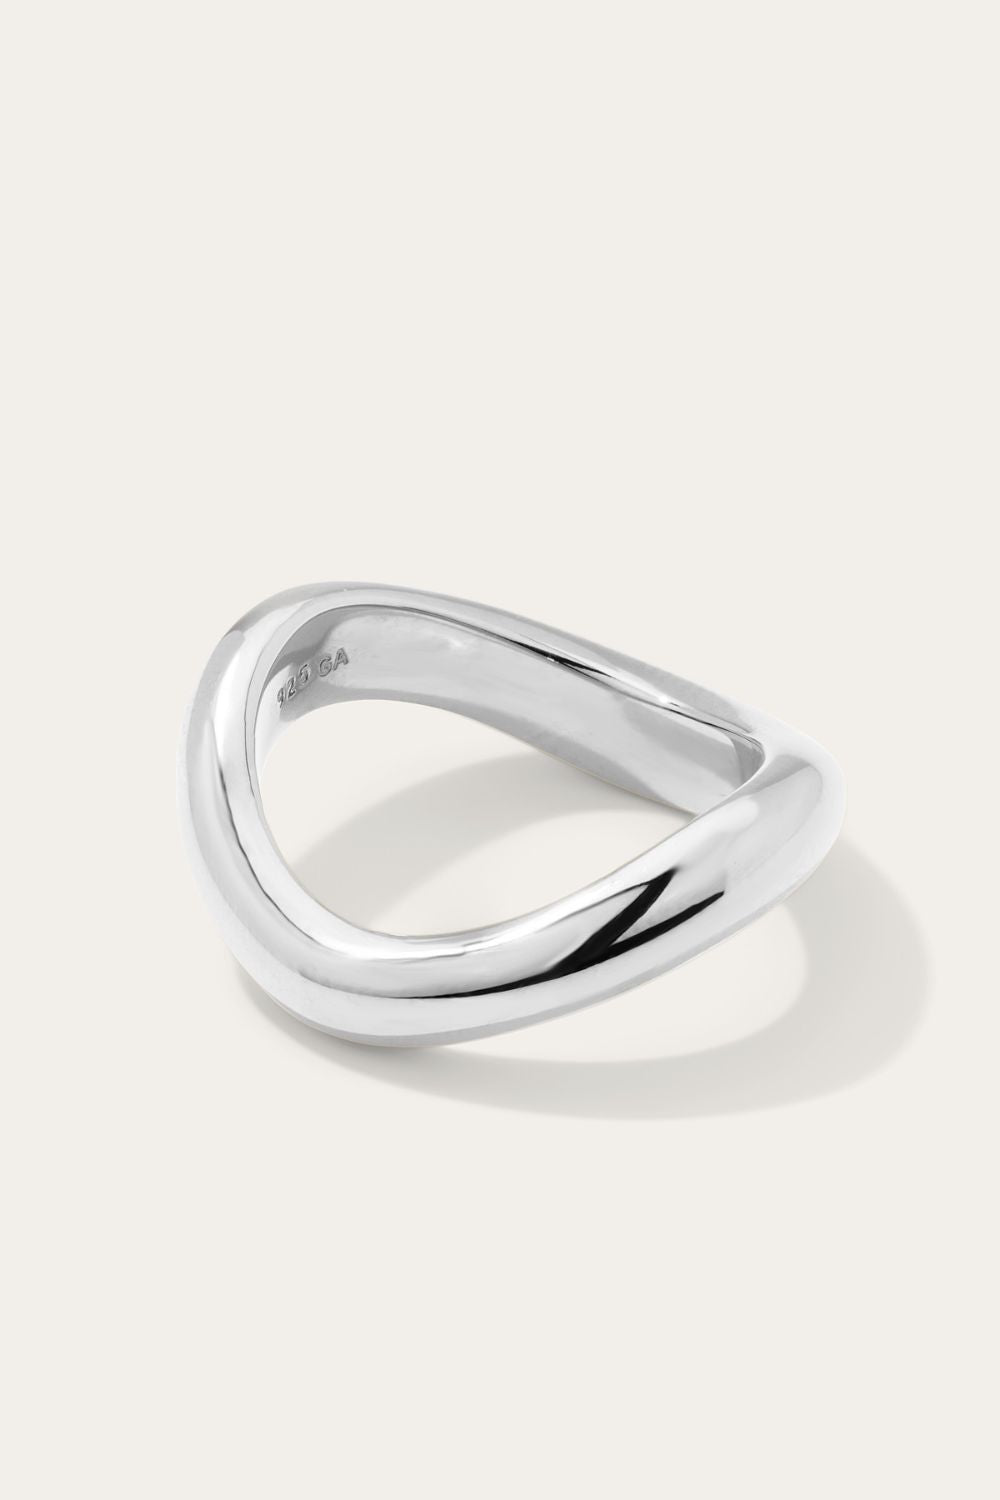 Kyma supersonic sterling silver ring